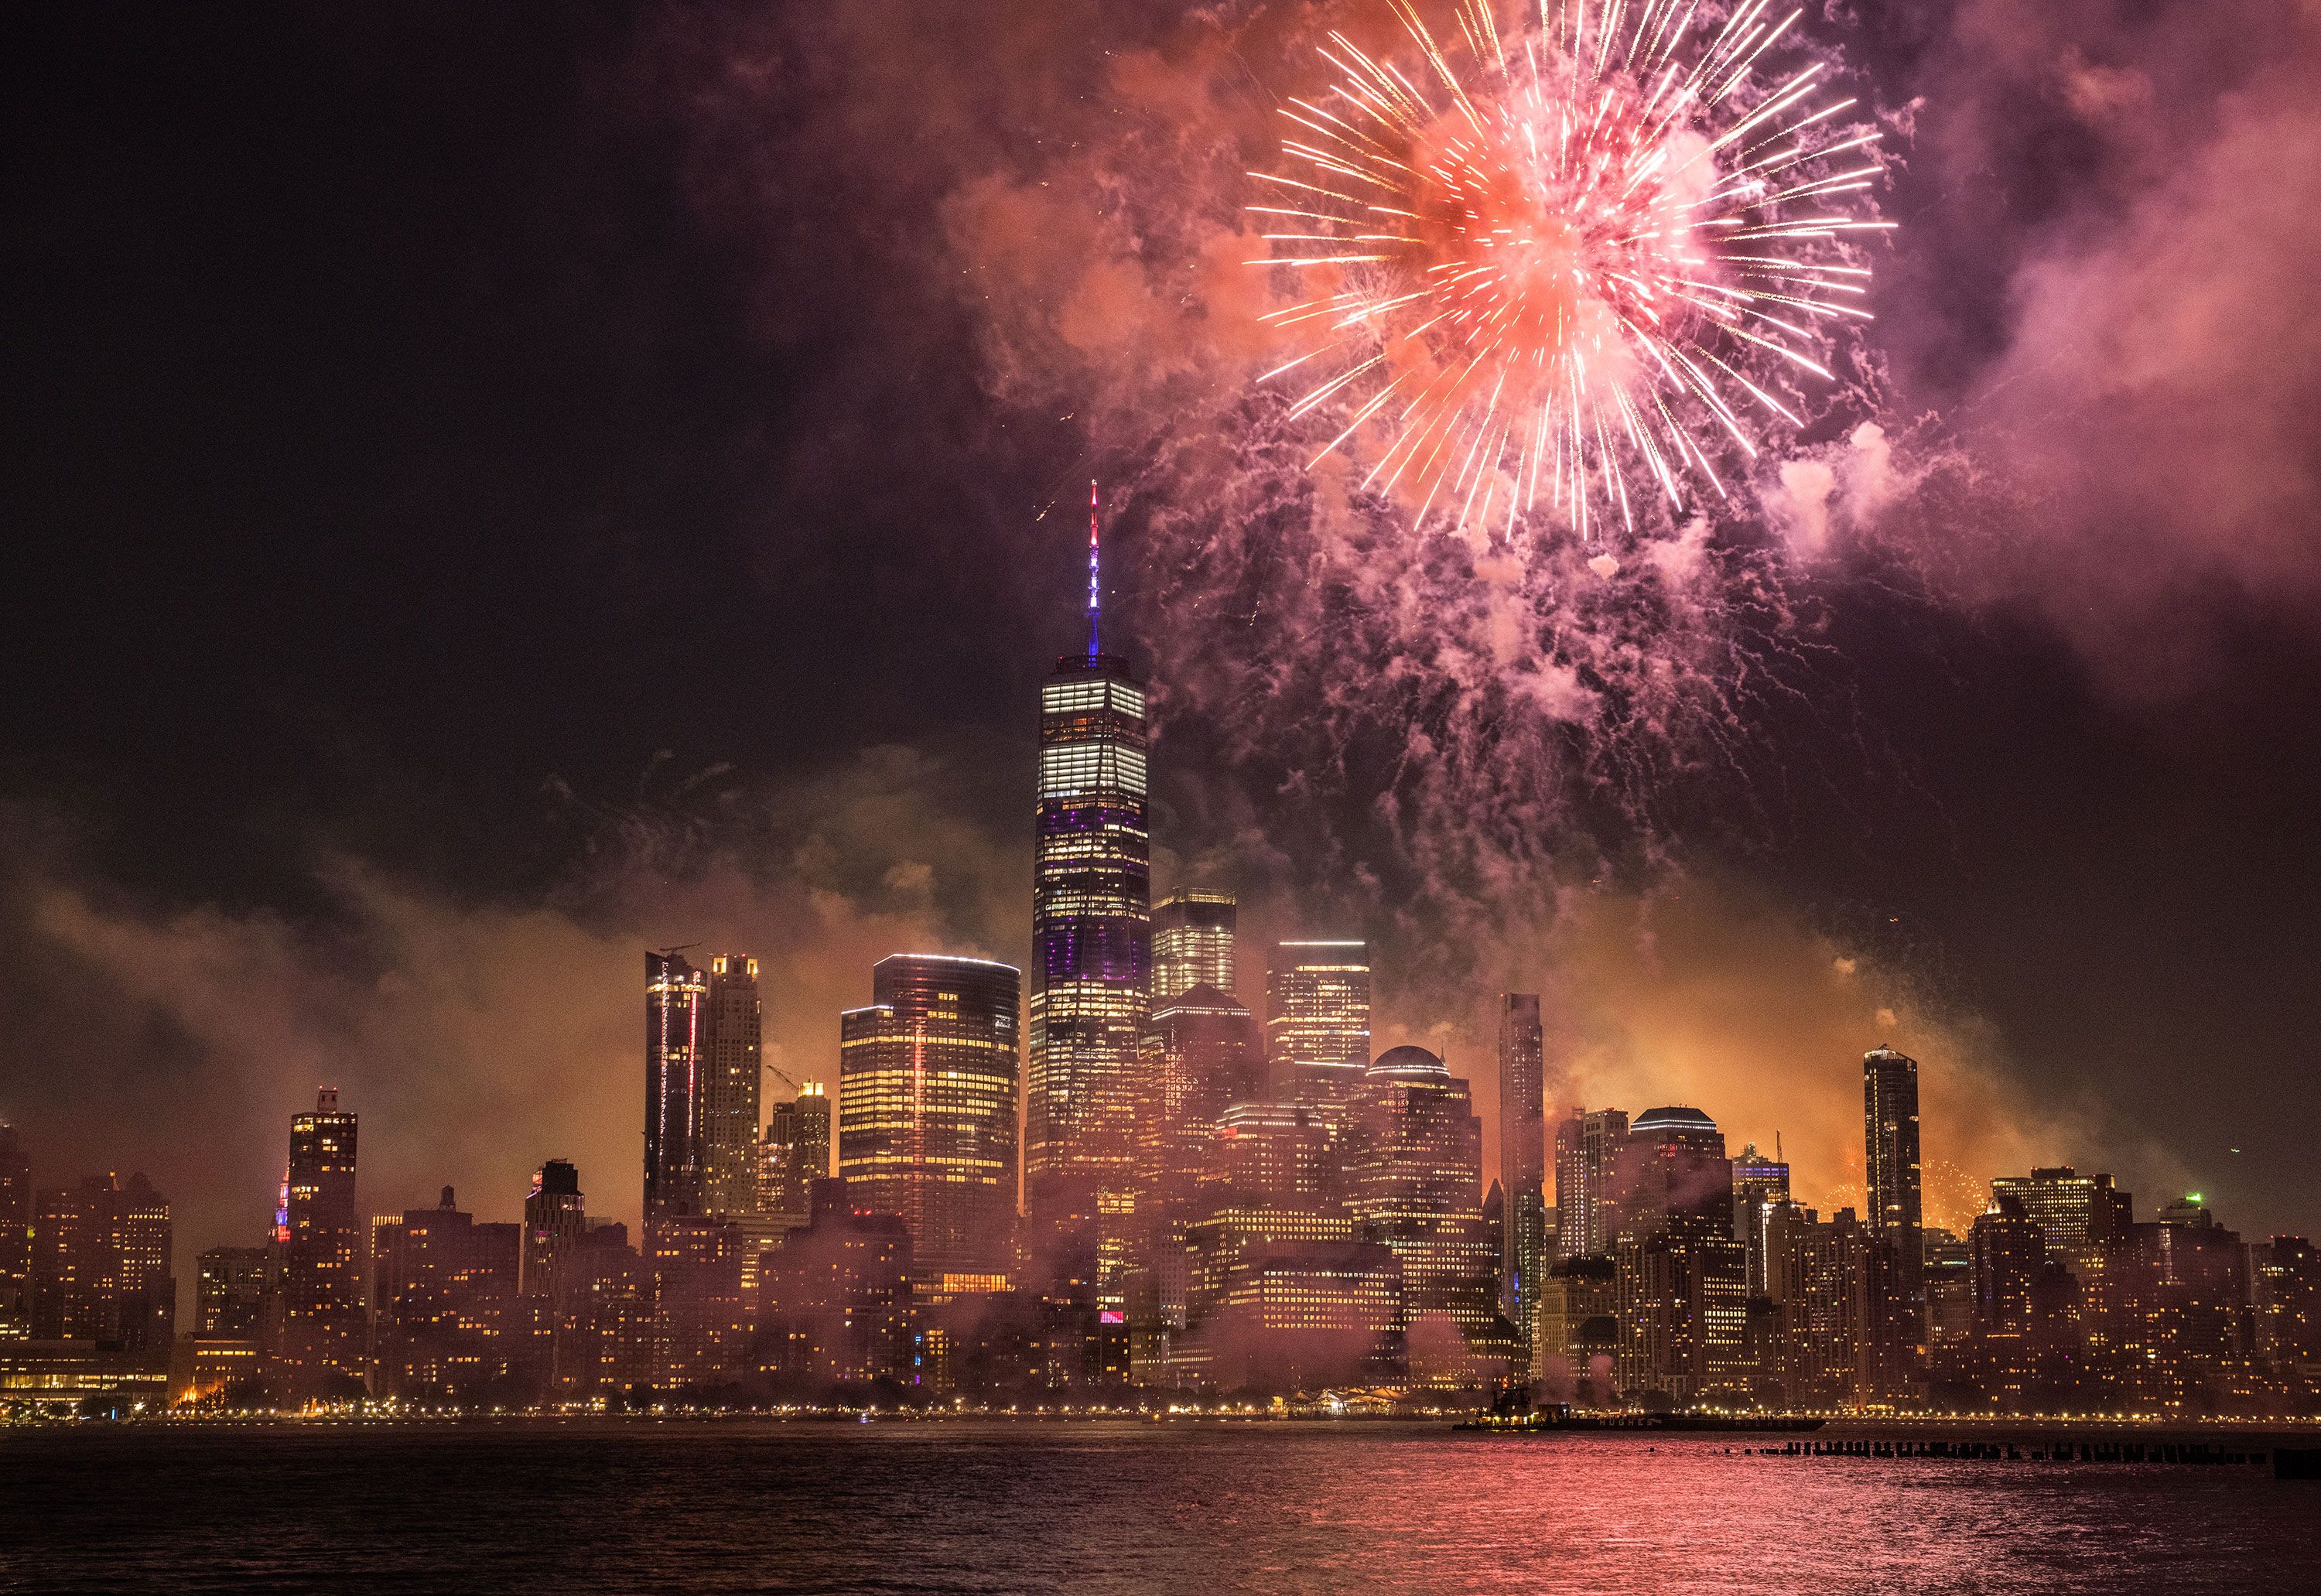 Macy's July Fourth fireworks show will be back this year